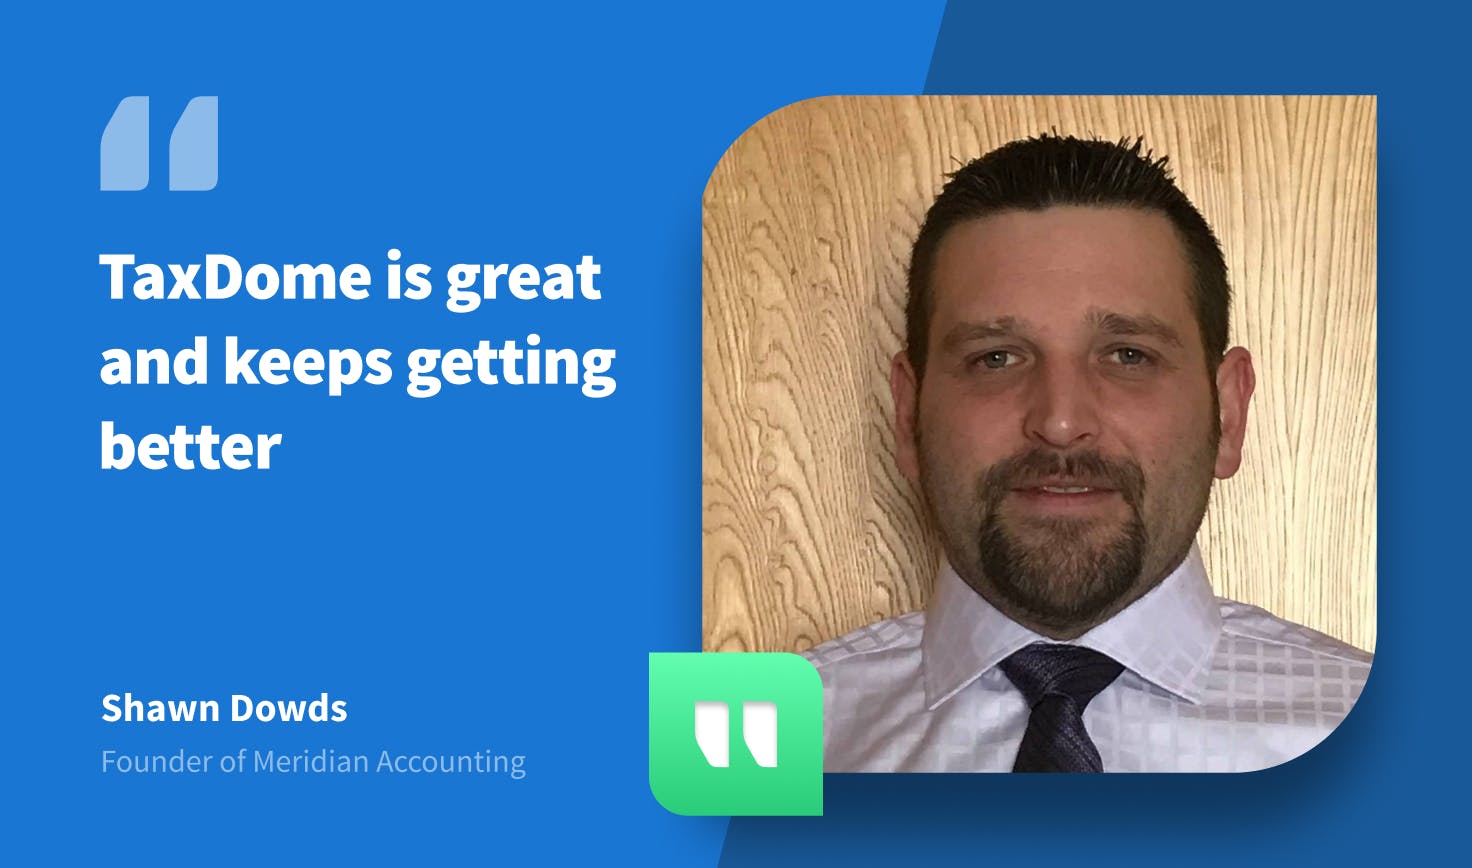 Canadian Accounting Firm Reviews TaxDome, ‘Keeps Getting Better’